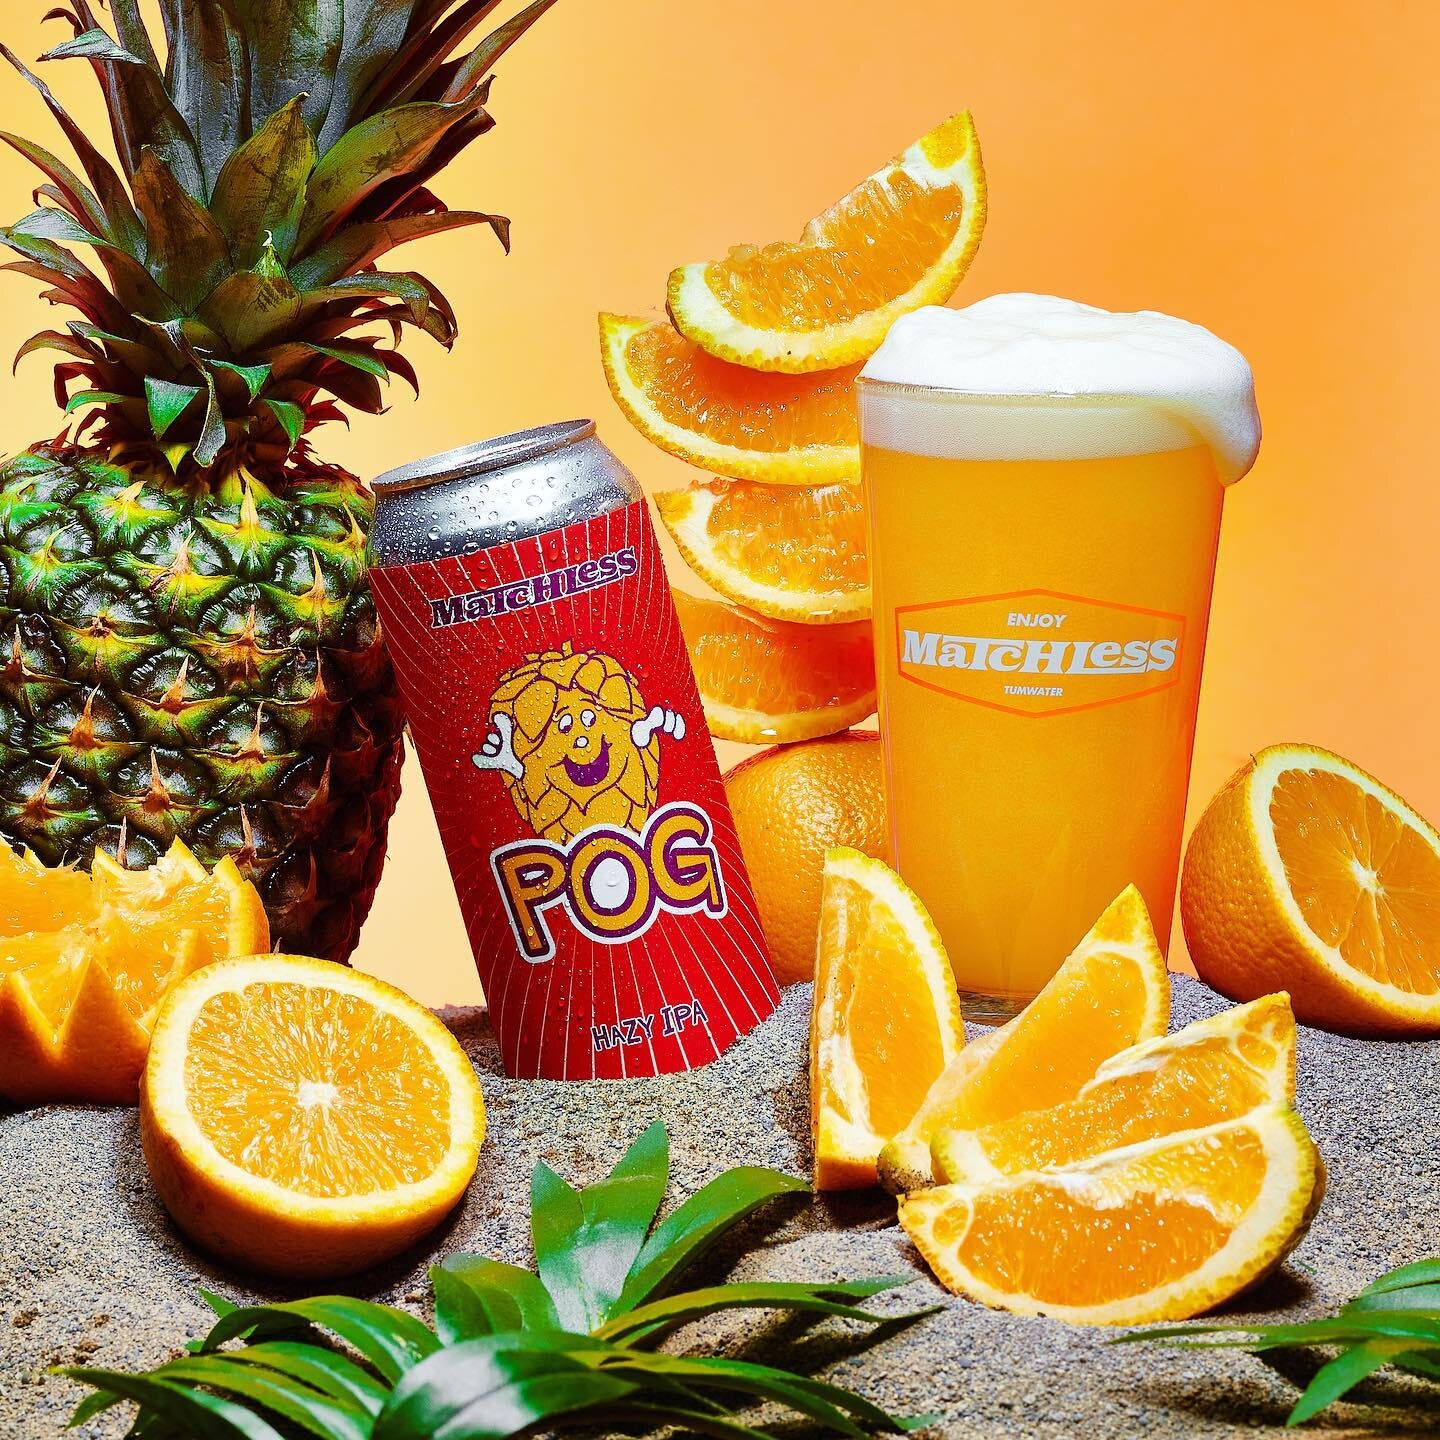 🍍🍹POG 🍊🌴

It&rsquo;s that time of year again!  The sun is back and it&rsquo;s time for one of our favorite beer releases.  POG Hazy IPA brings all the fruit flavor you&rsquo;d expect... straight from the hop cones! A fluffy bed of flaked oats and